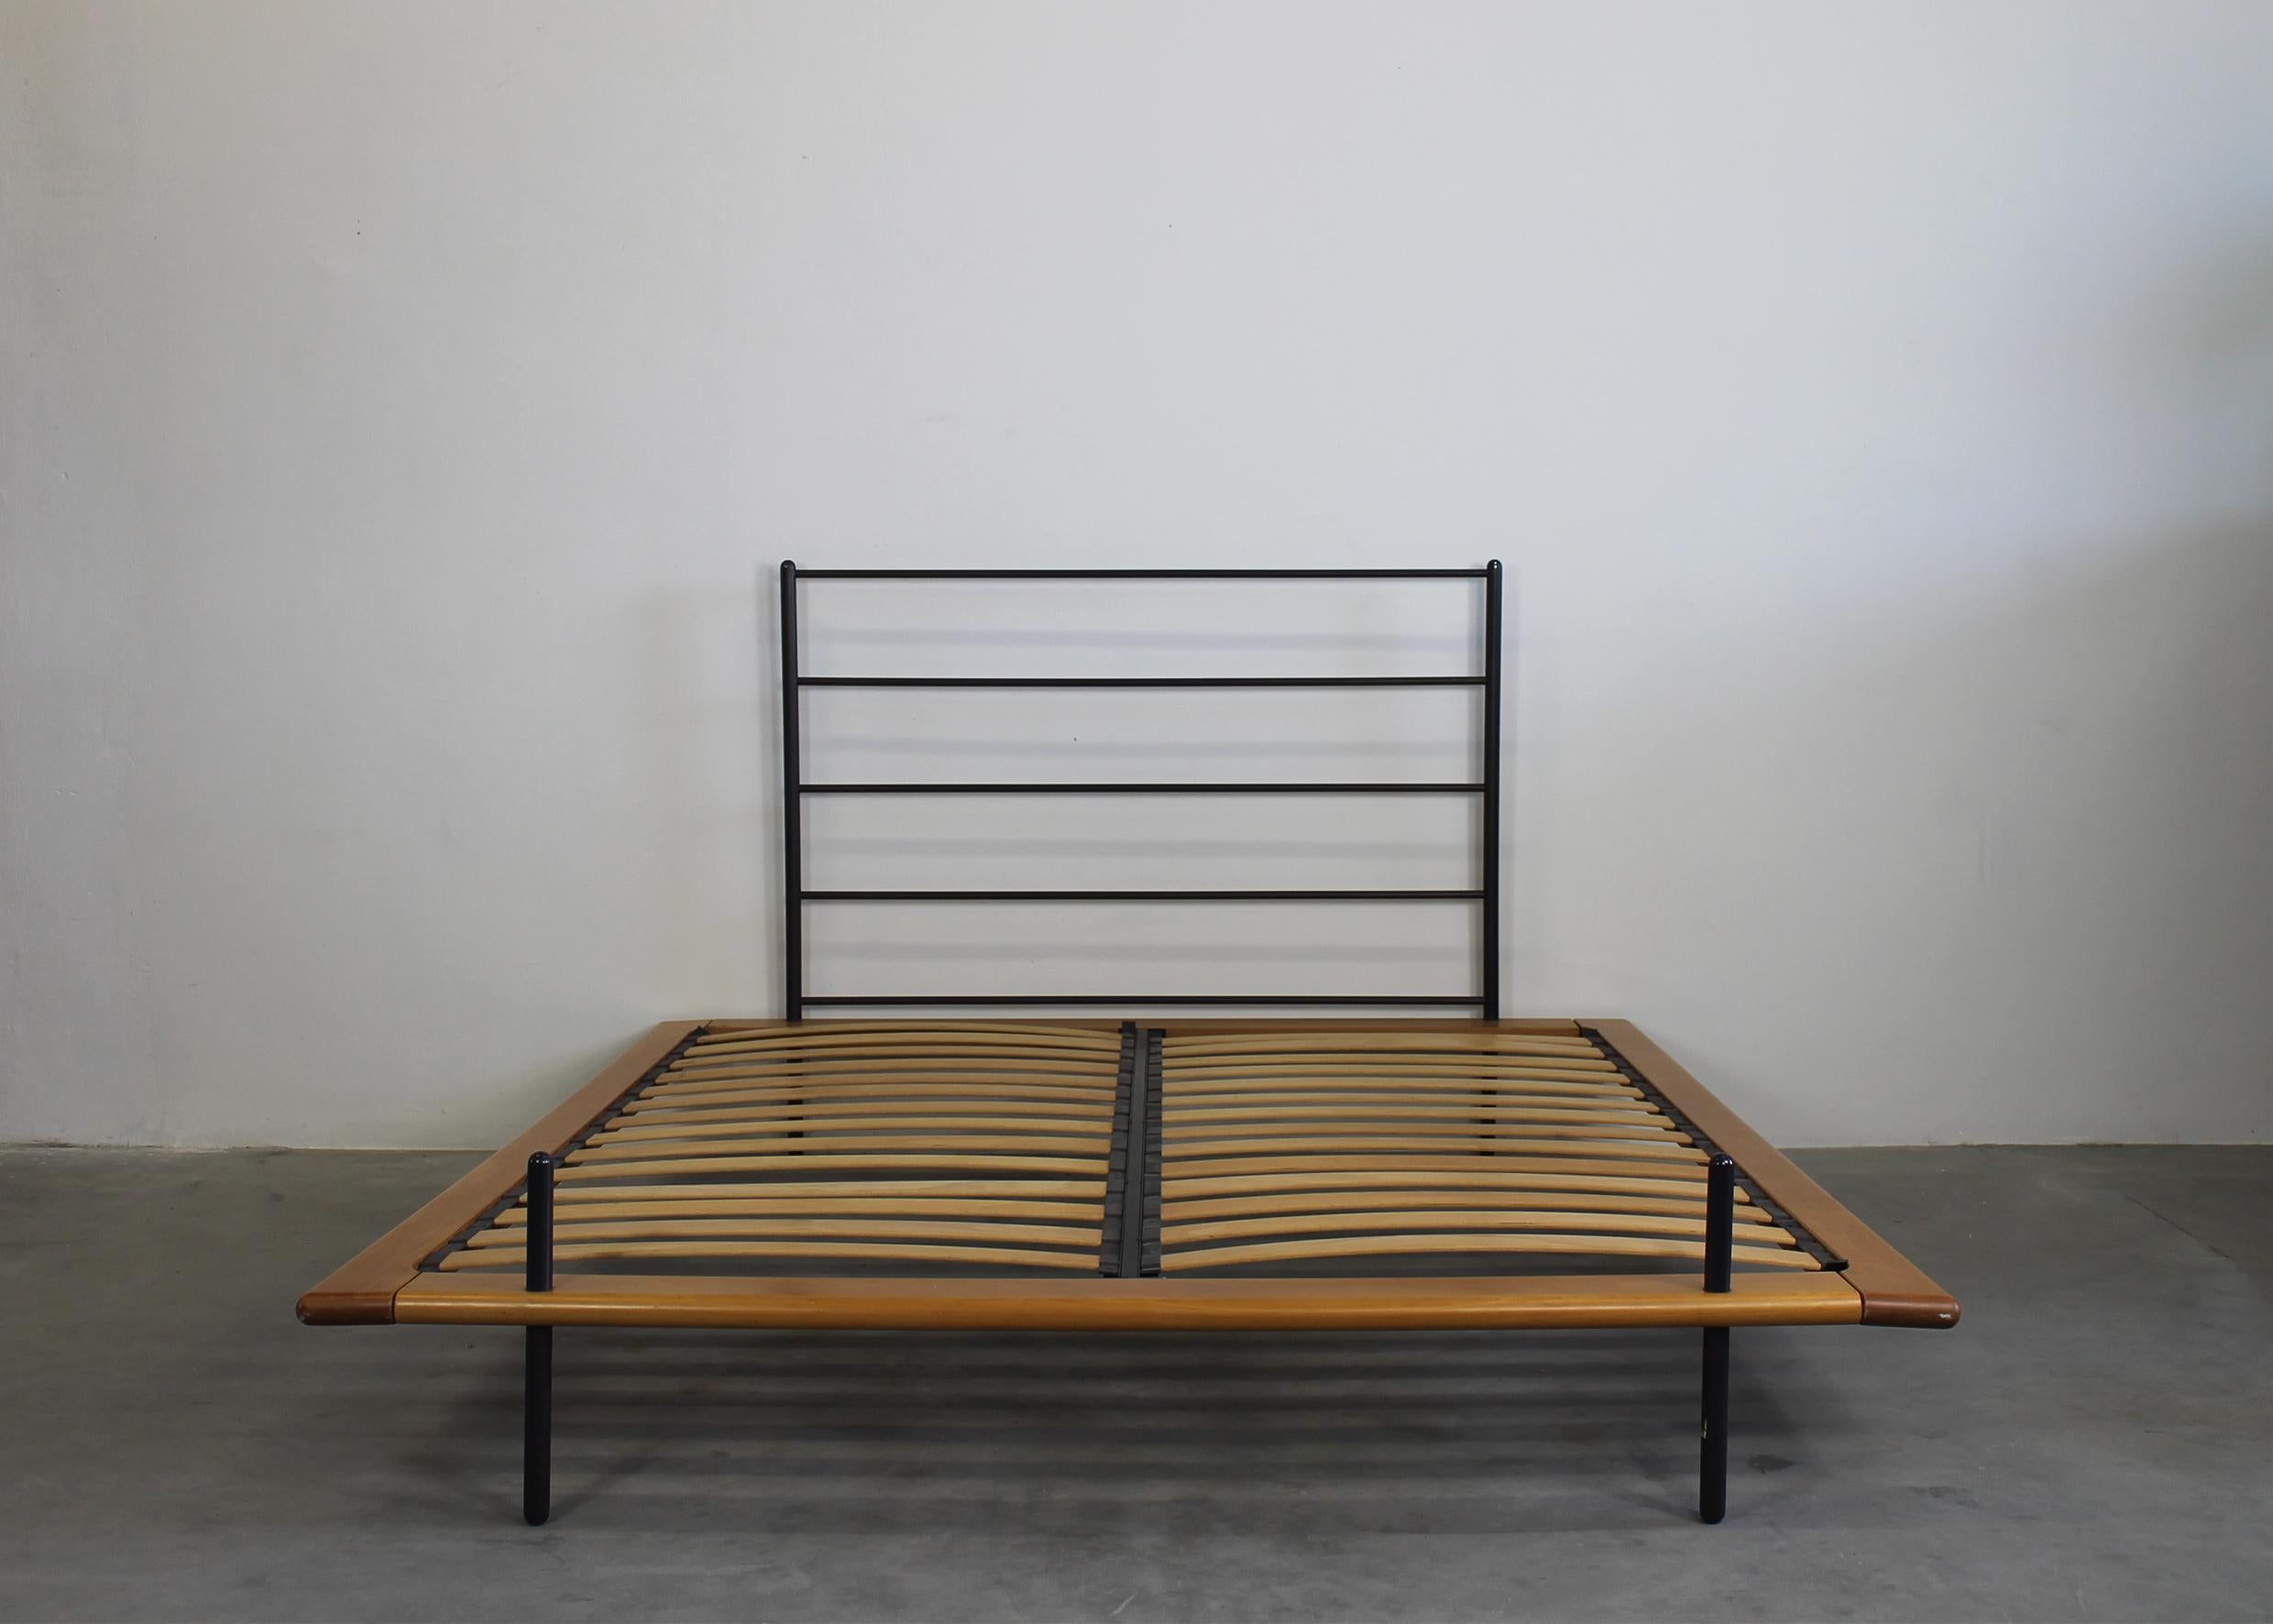 Acquariano bed structure with frame and slats in beech wood, headboard and legs in black painted steel. 
Designed by Paolo Pallucco and produced by Pallucco in the 1980s. 

Pallucco, moving away from the dominant styles, has always experimented